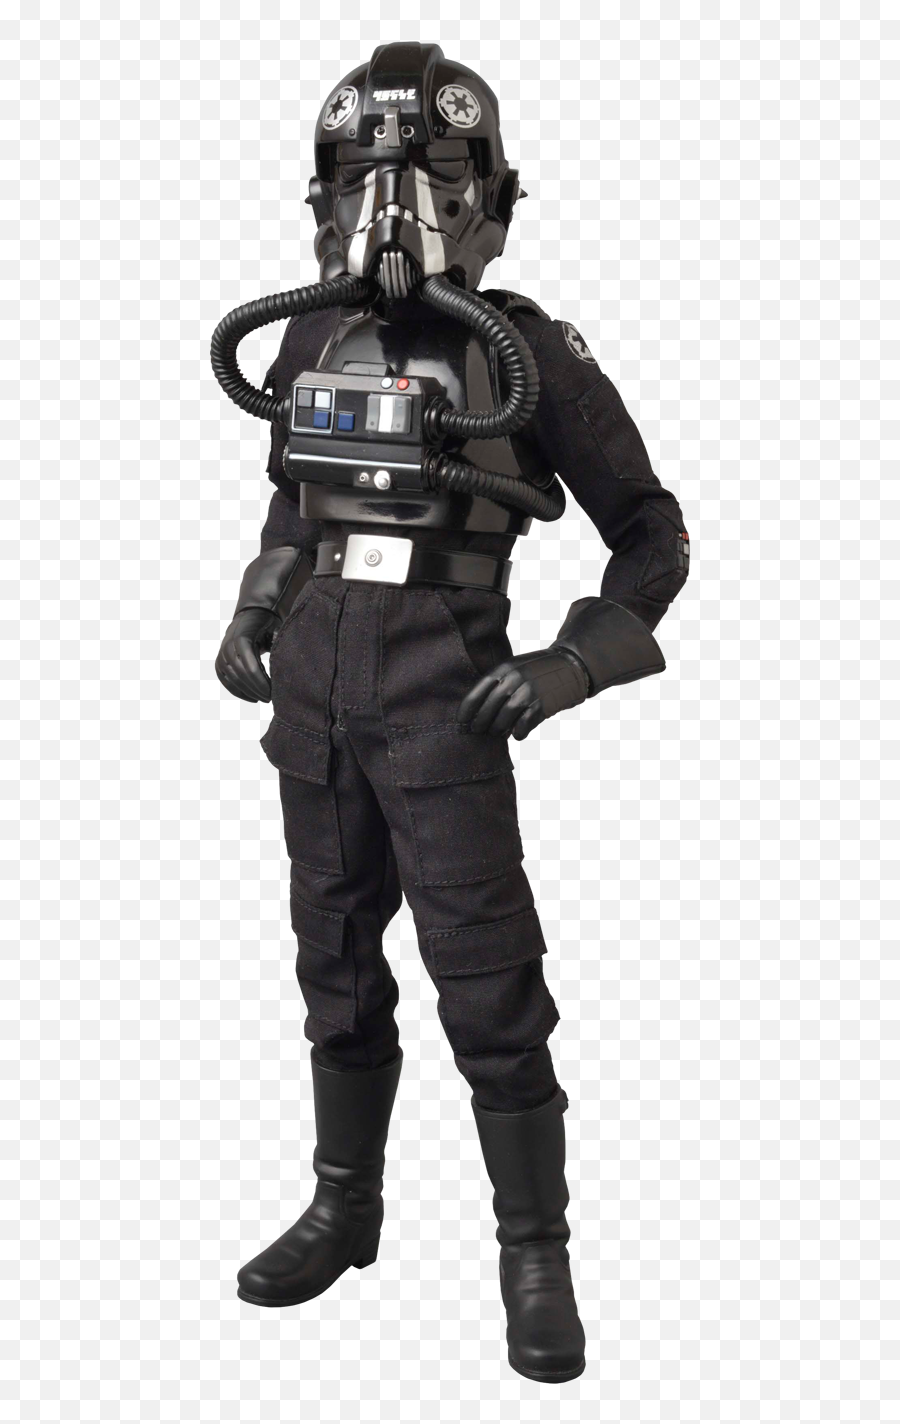 Star Wars Tie Fighter Pilot Sixth Scale Figure By Medicom To Emoji,Tie Fighters Png